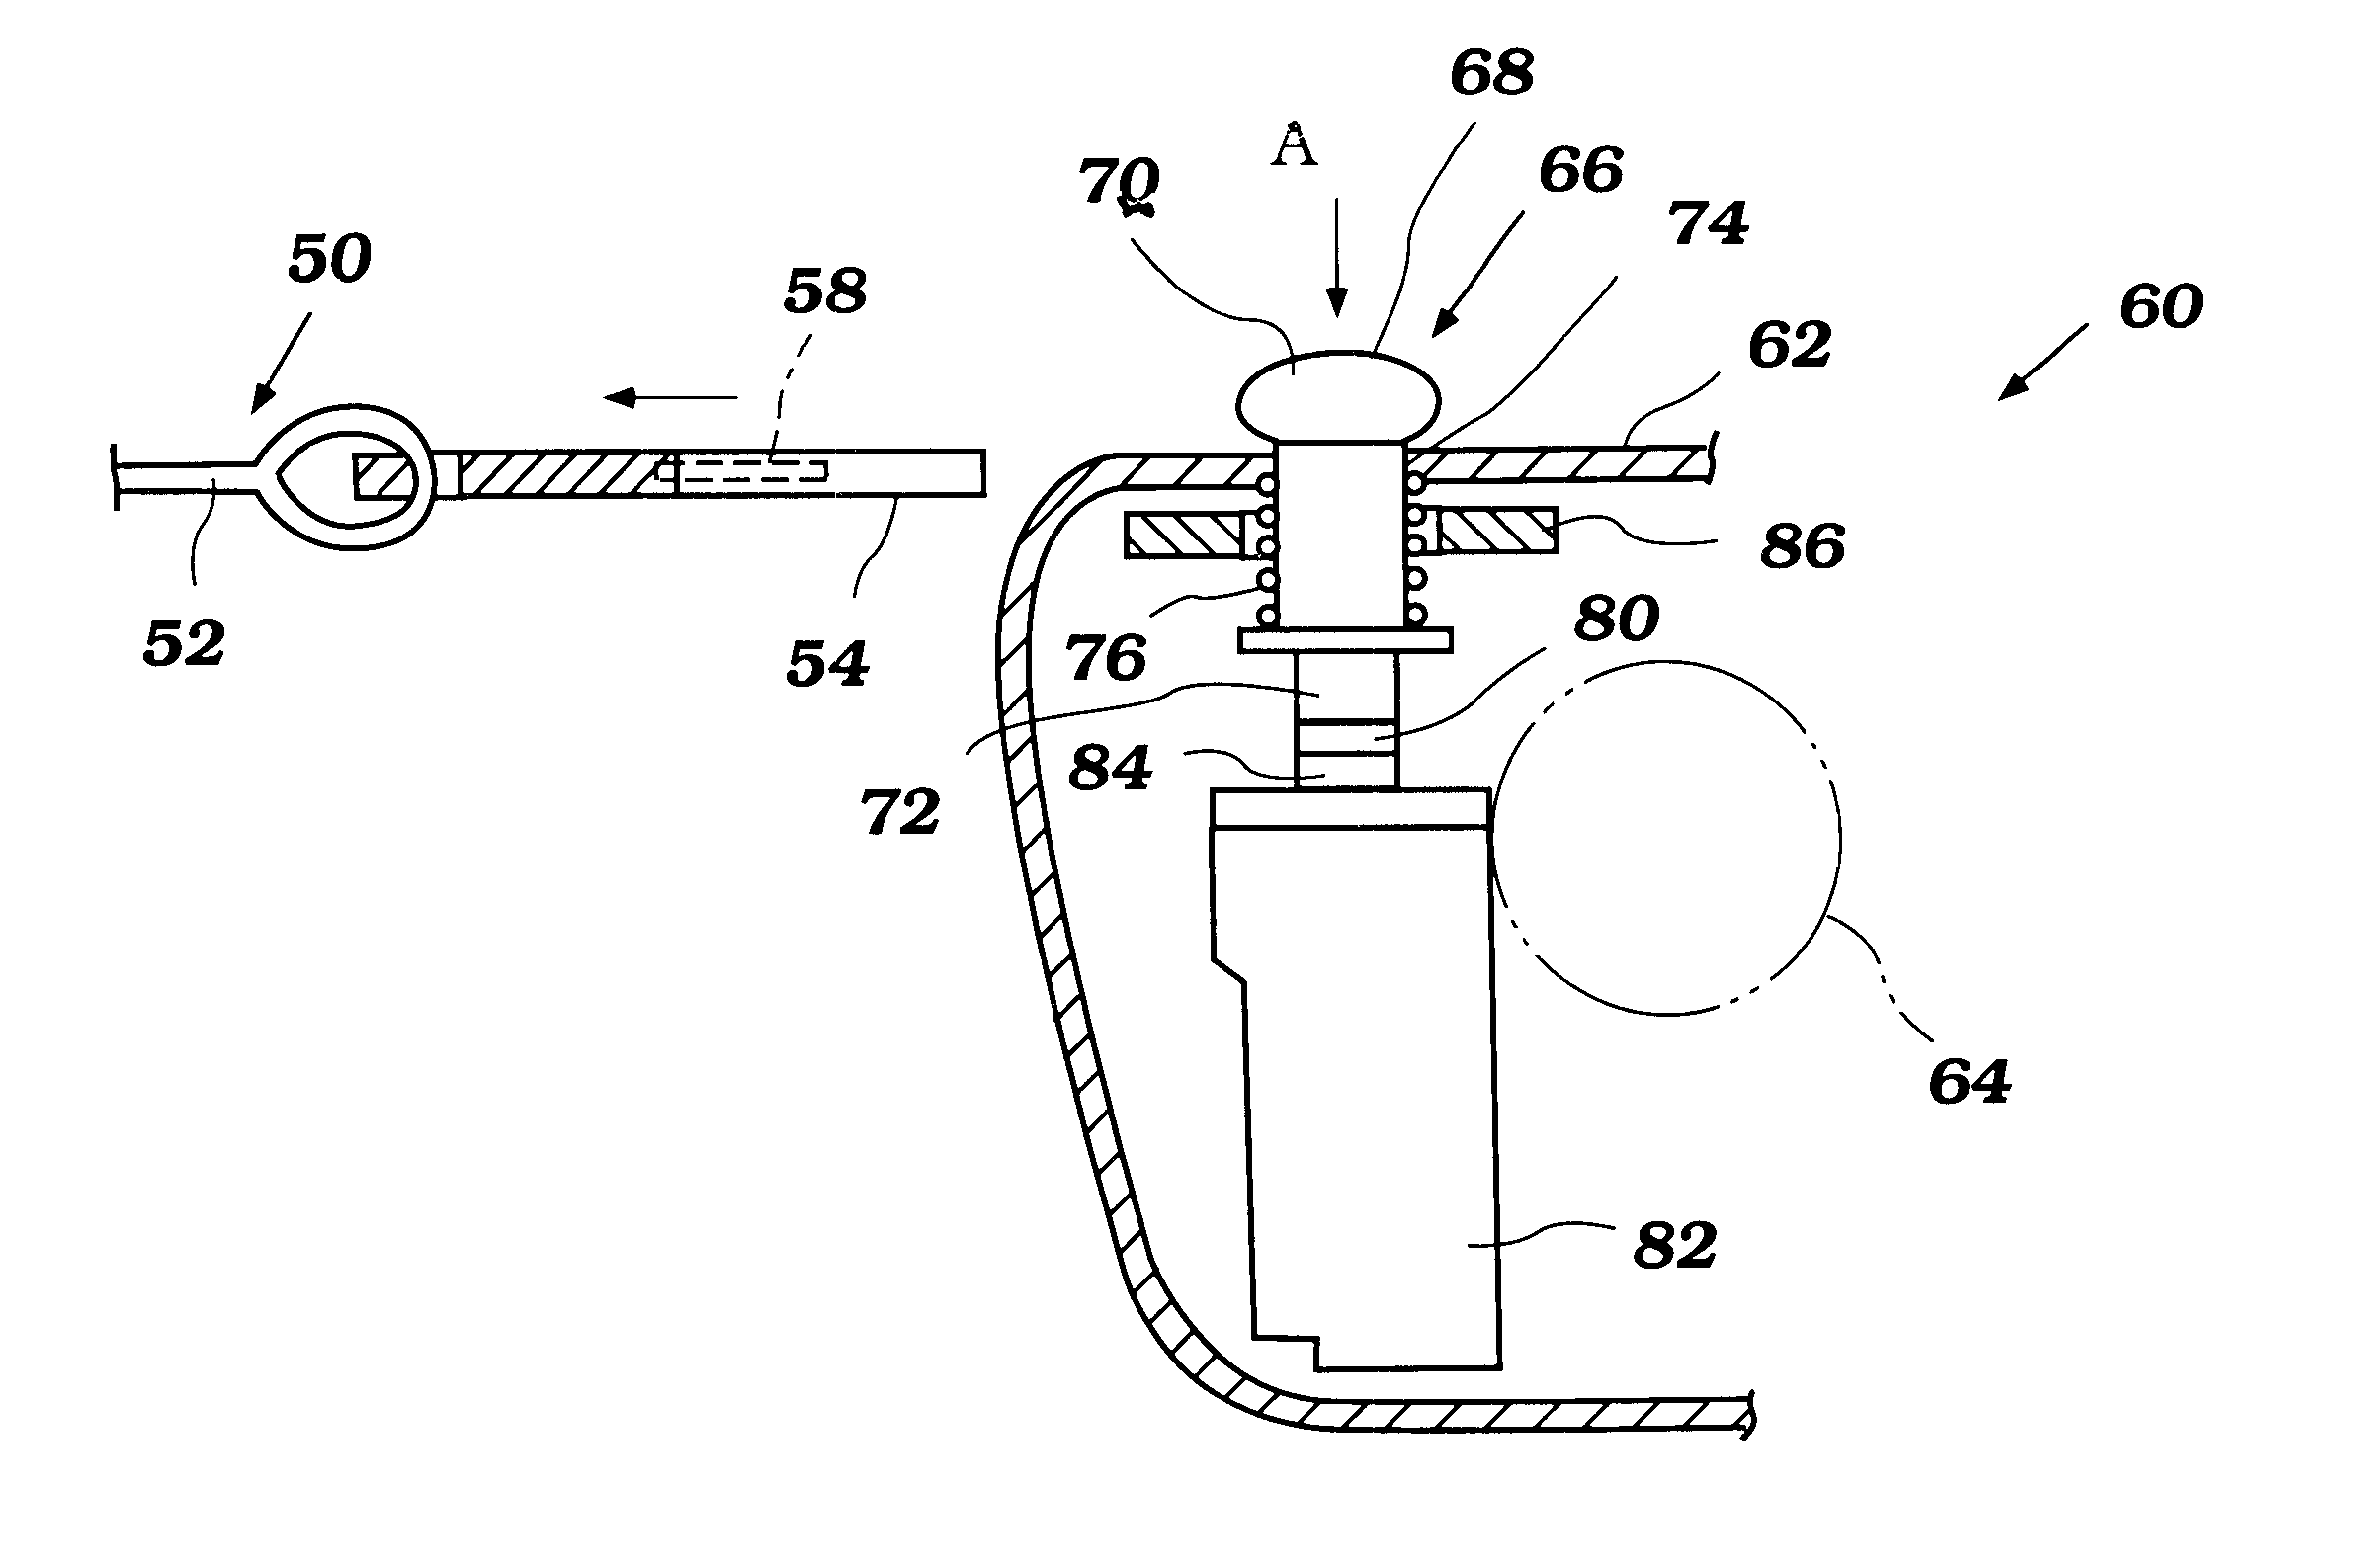 Immobilization system for watercraft